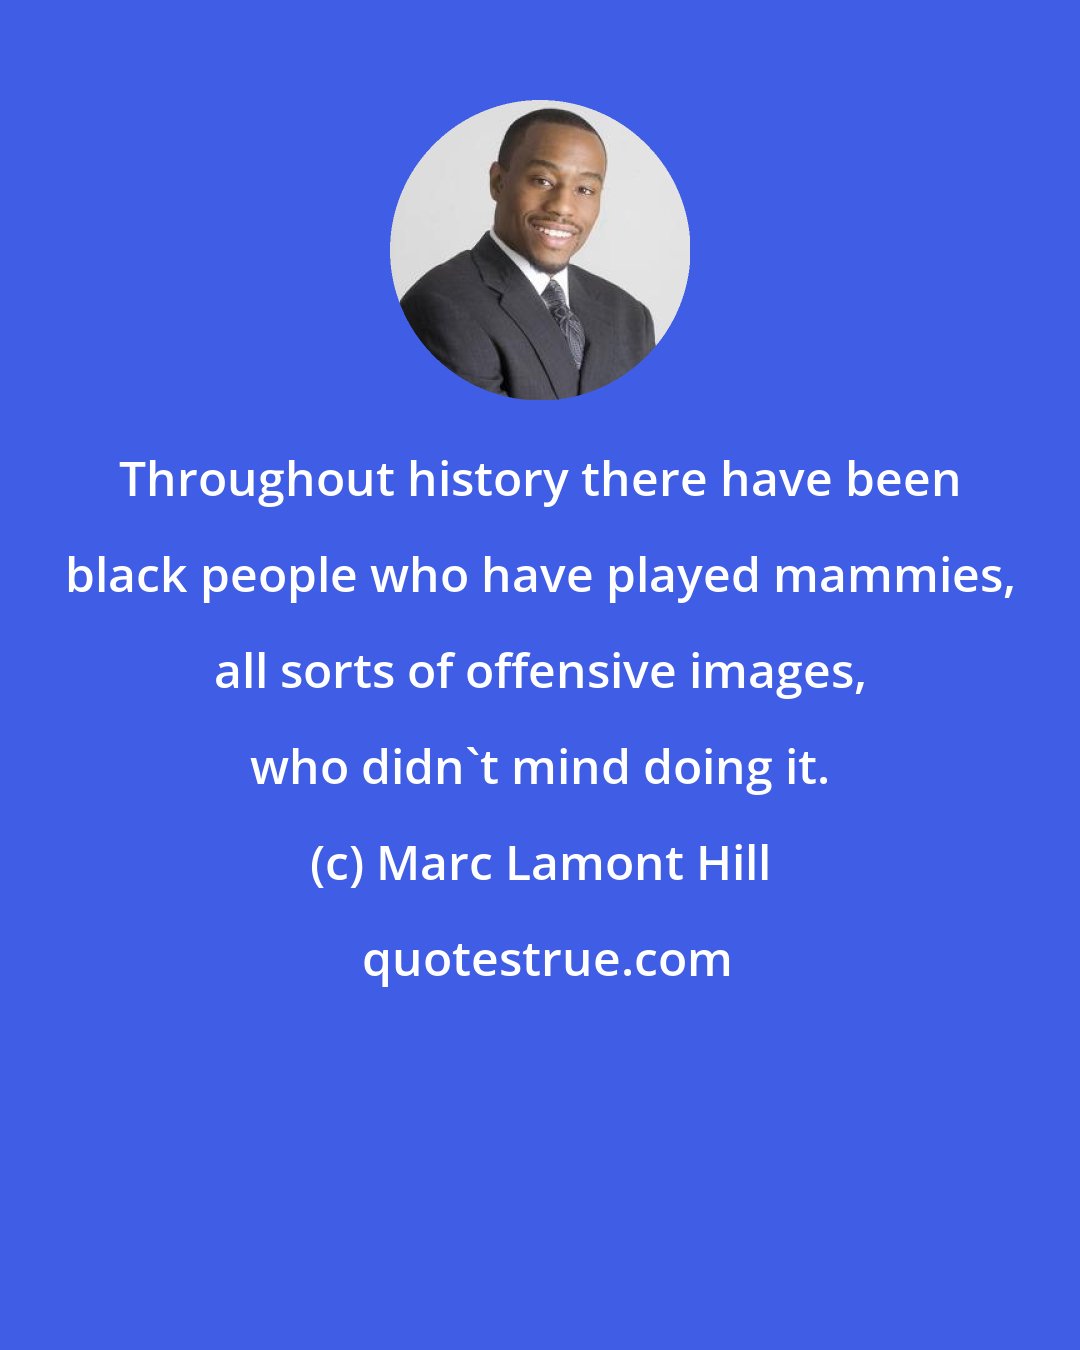 Marc Lamont Hill: Throughout history there have been black people who have played mammies, all sorts of offensive images, who didn't mind doing it.